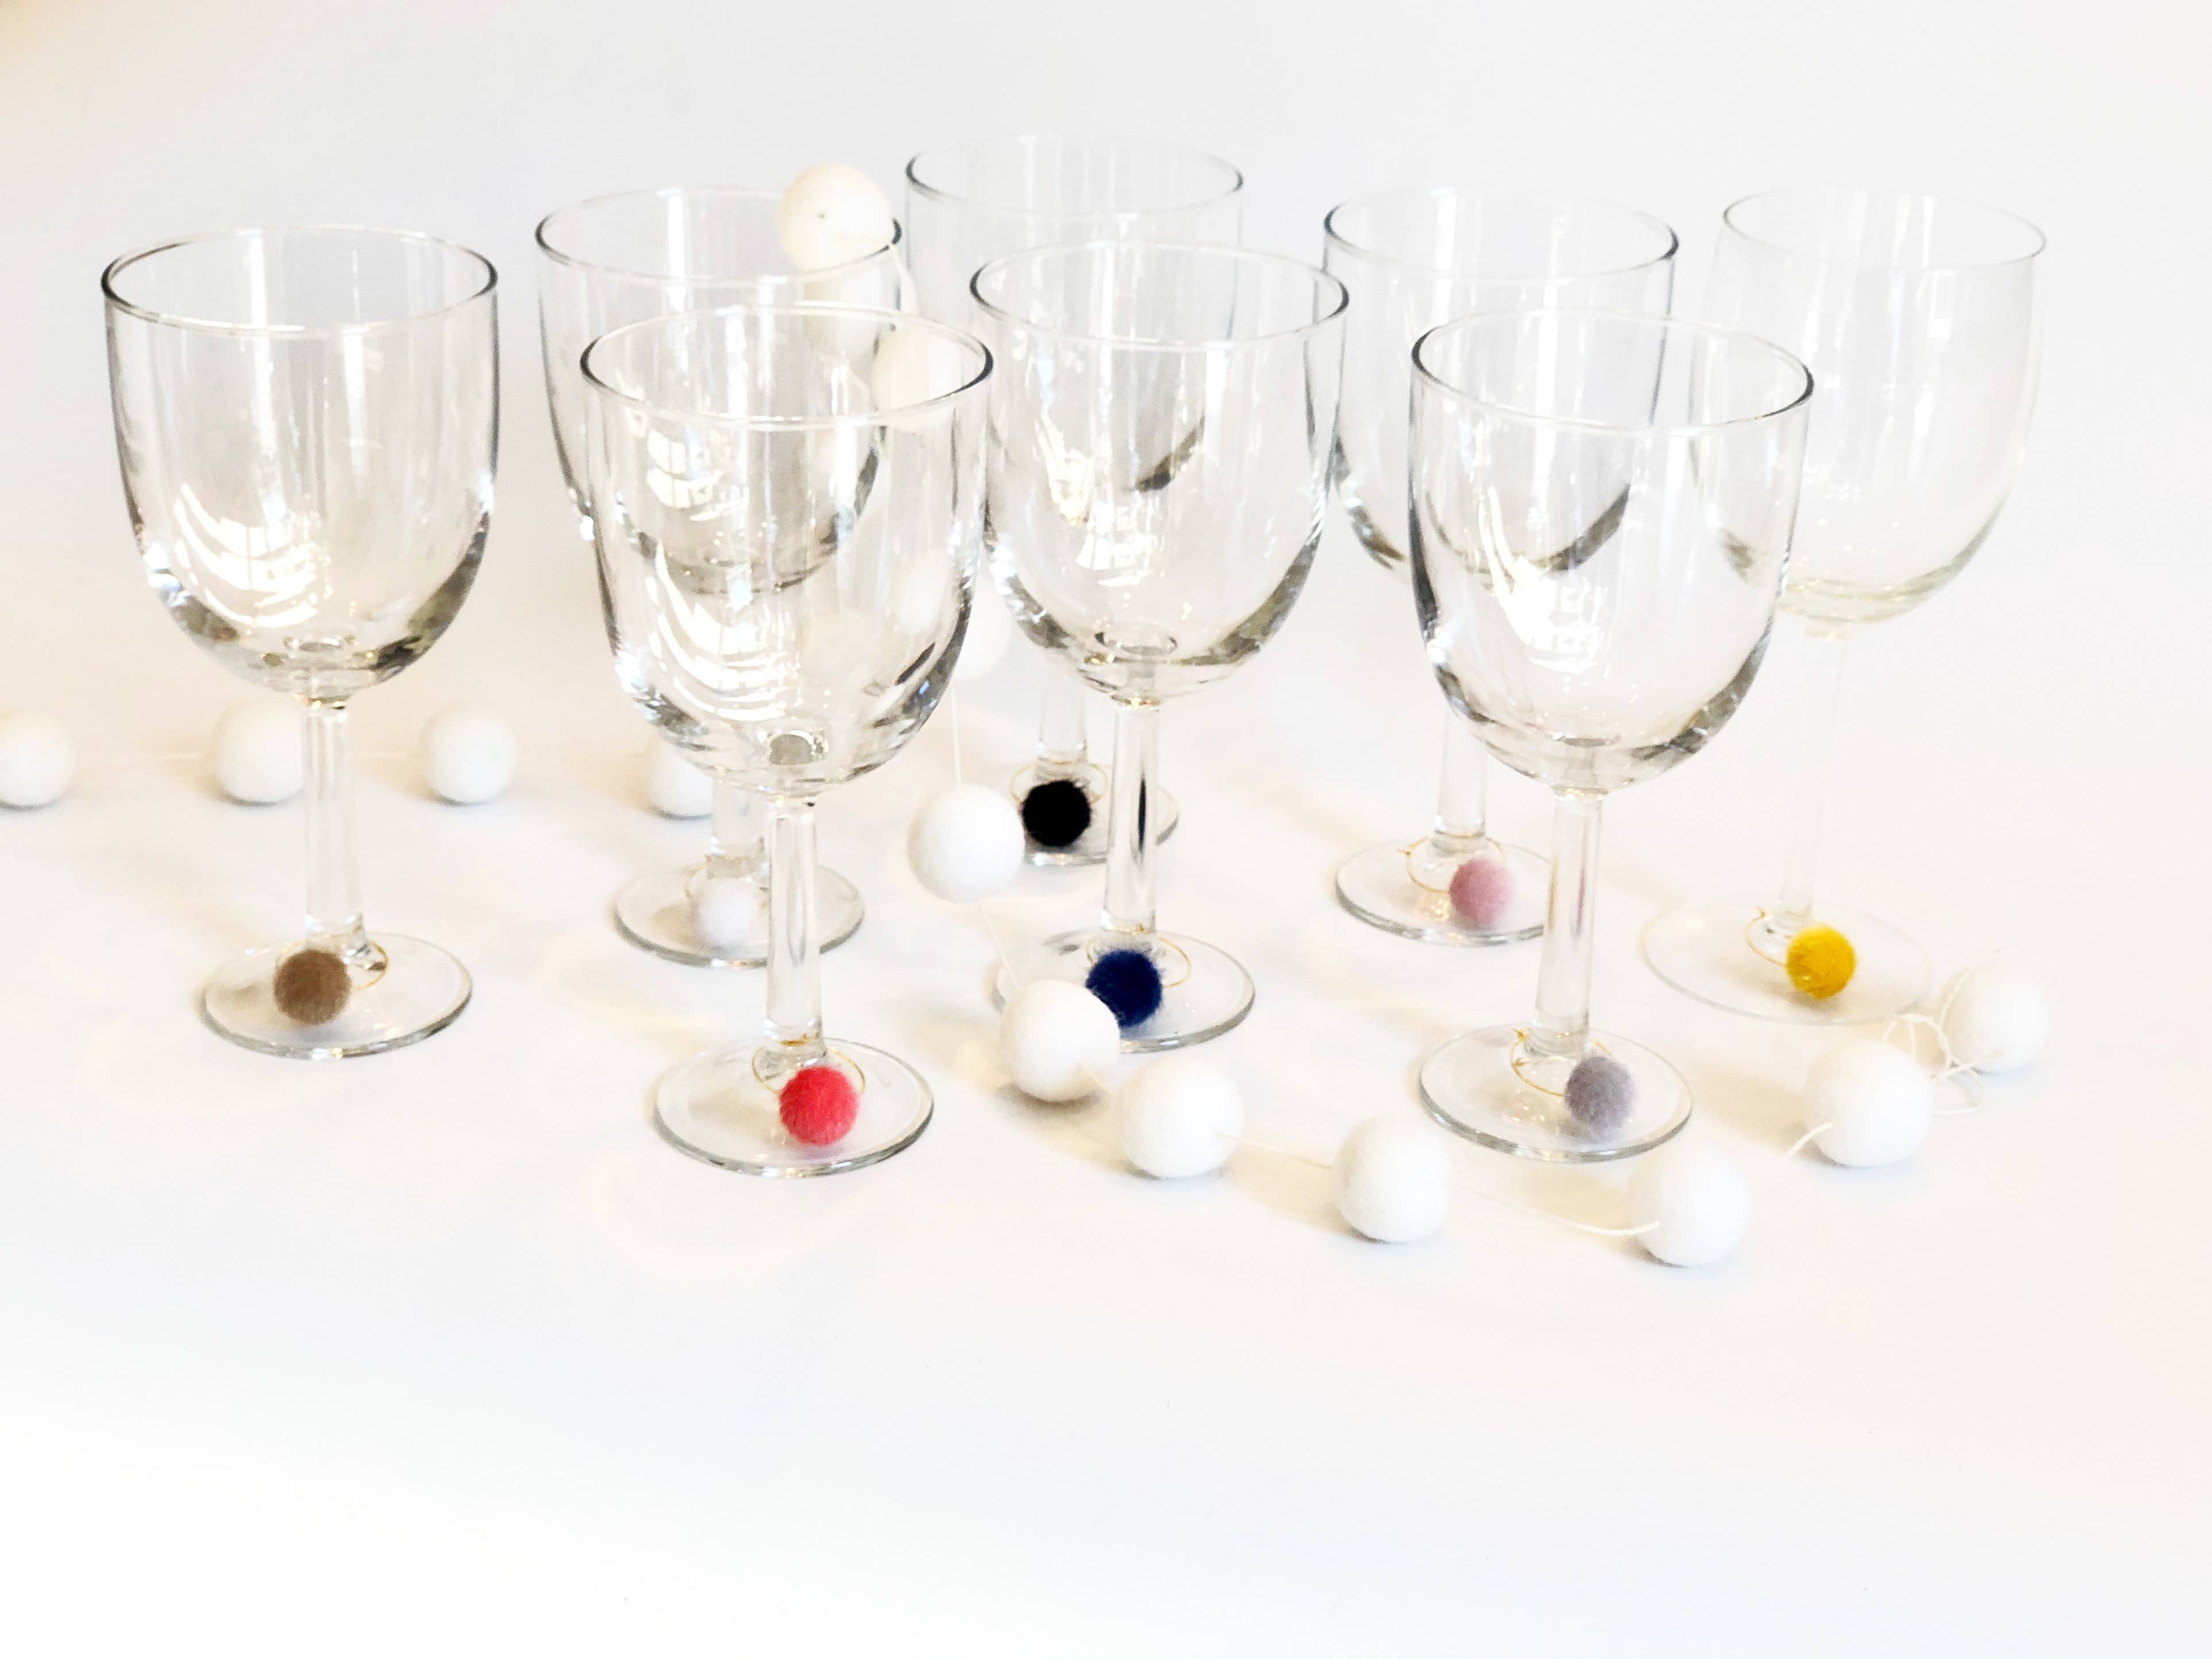 8 Cocktail Glasses That You Need For Your Next Party